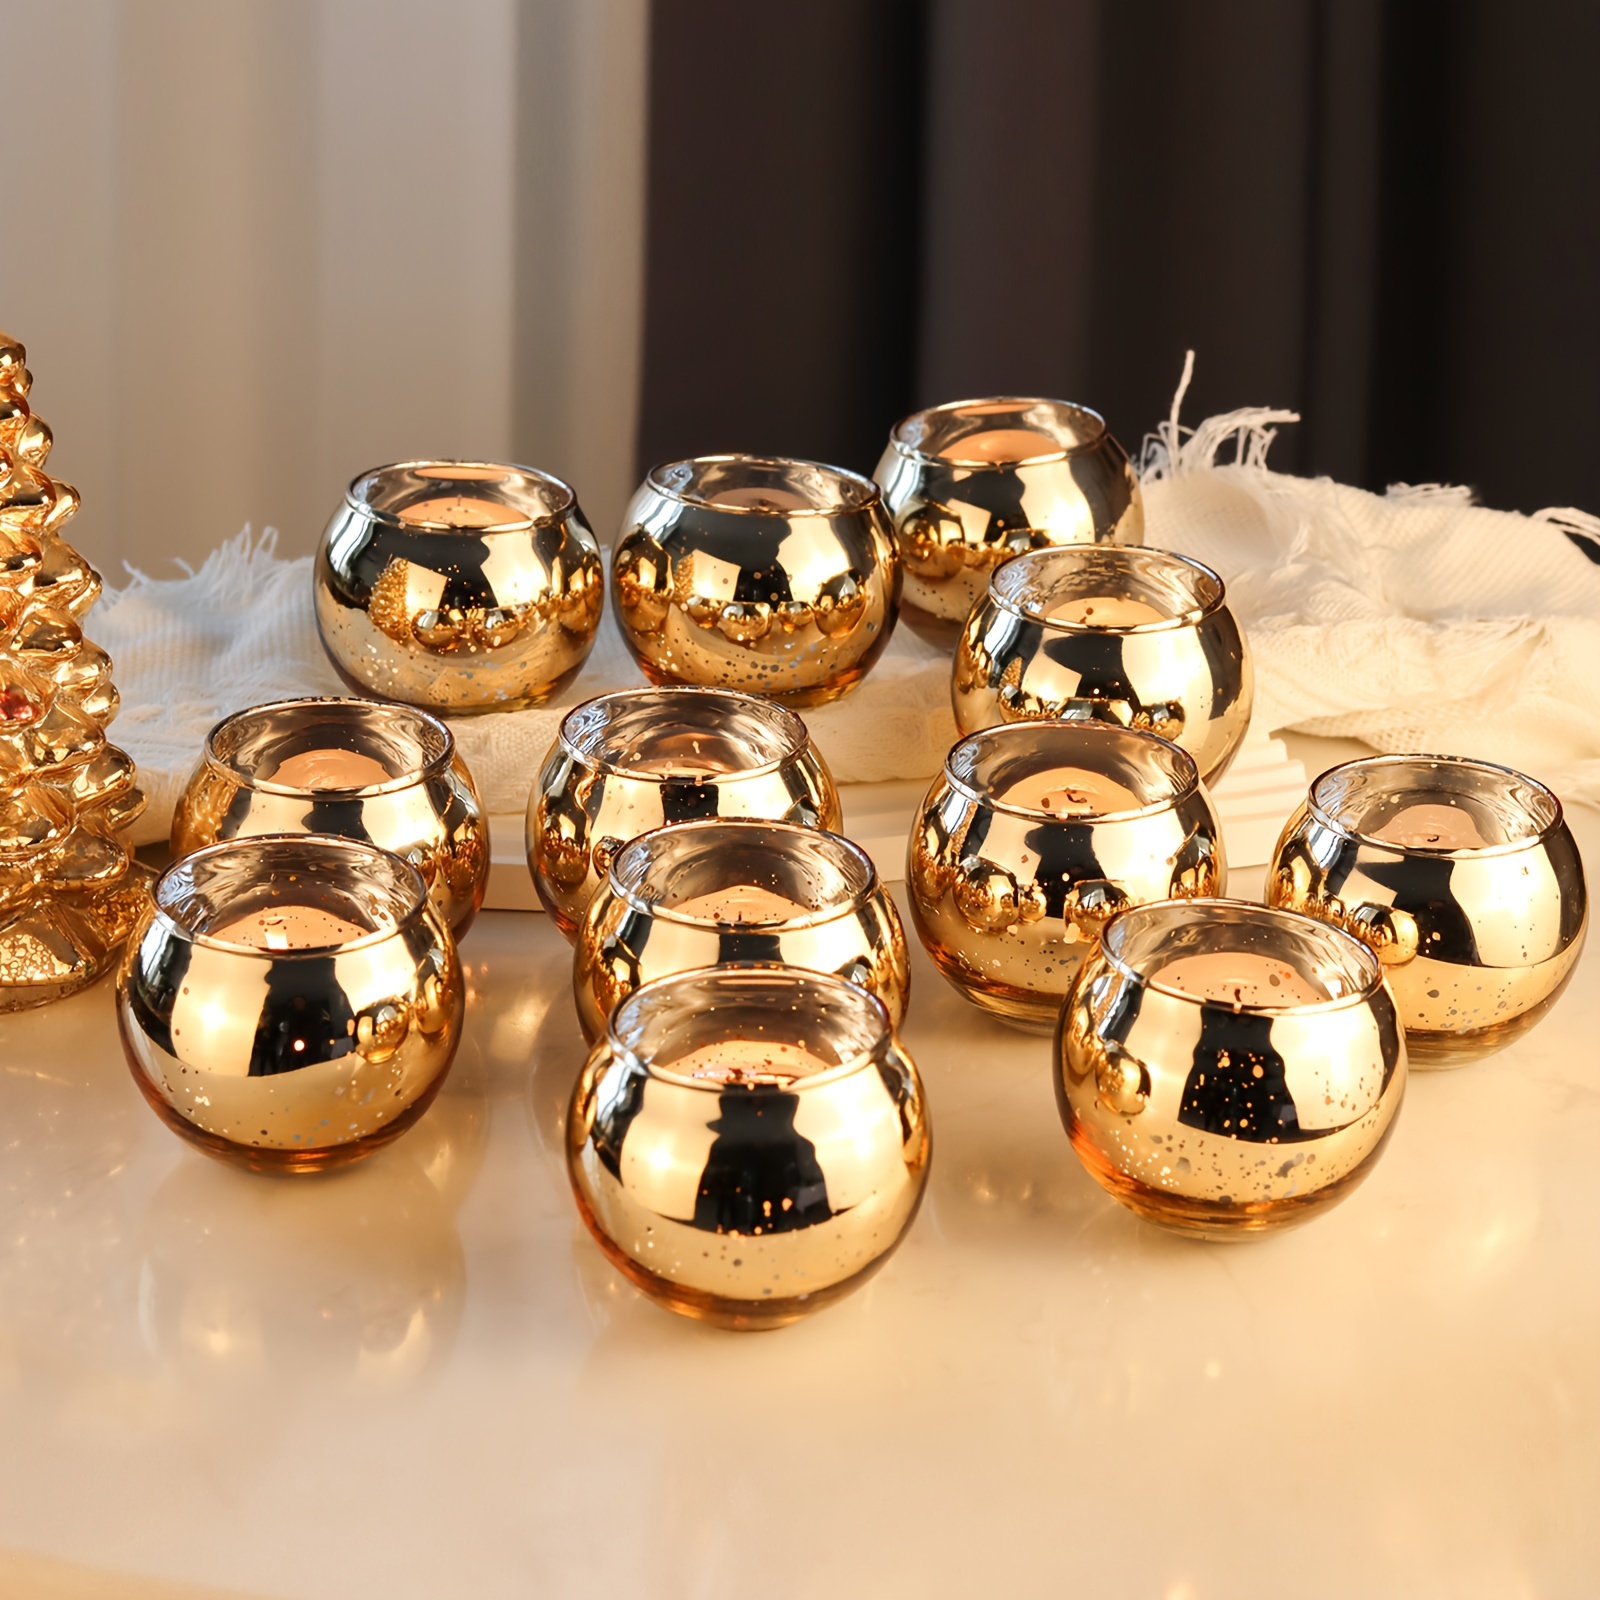 

12pcs, Golden Candle Holders Golden Tealight Candle Holders For Christmas Party Decorations, Round Glass Candle Holders Bulk For Wedding, Birthday, Anniversary, And Holiday Decor